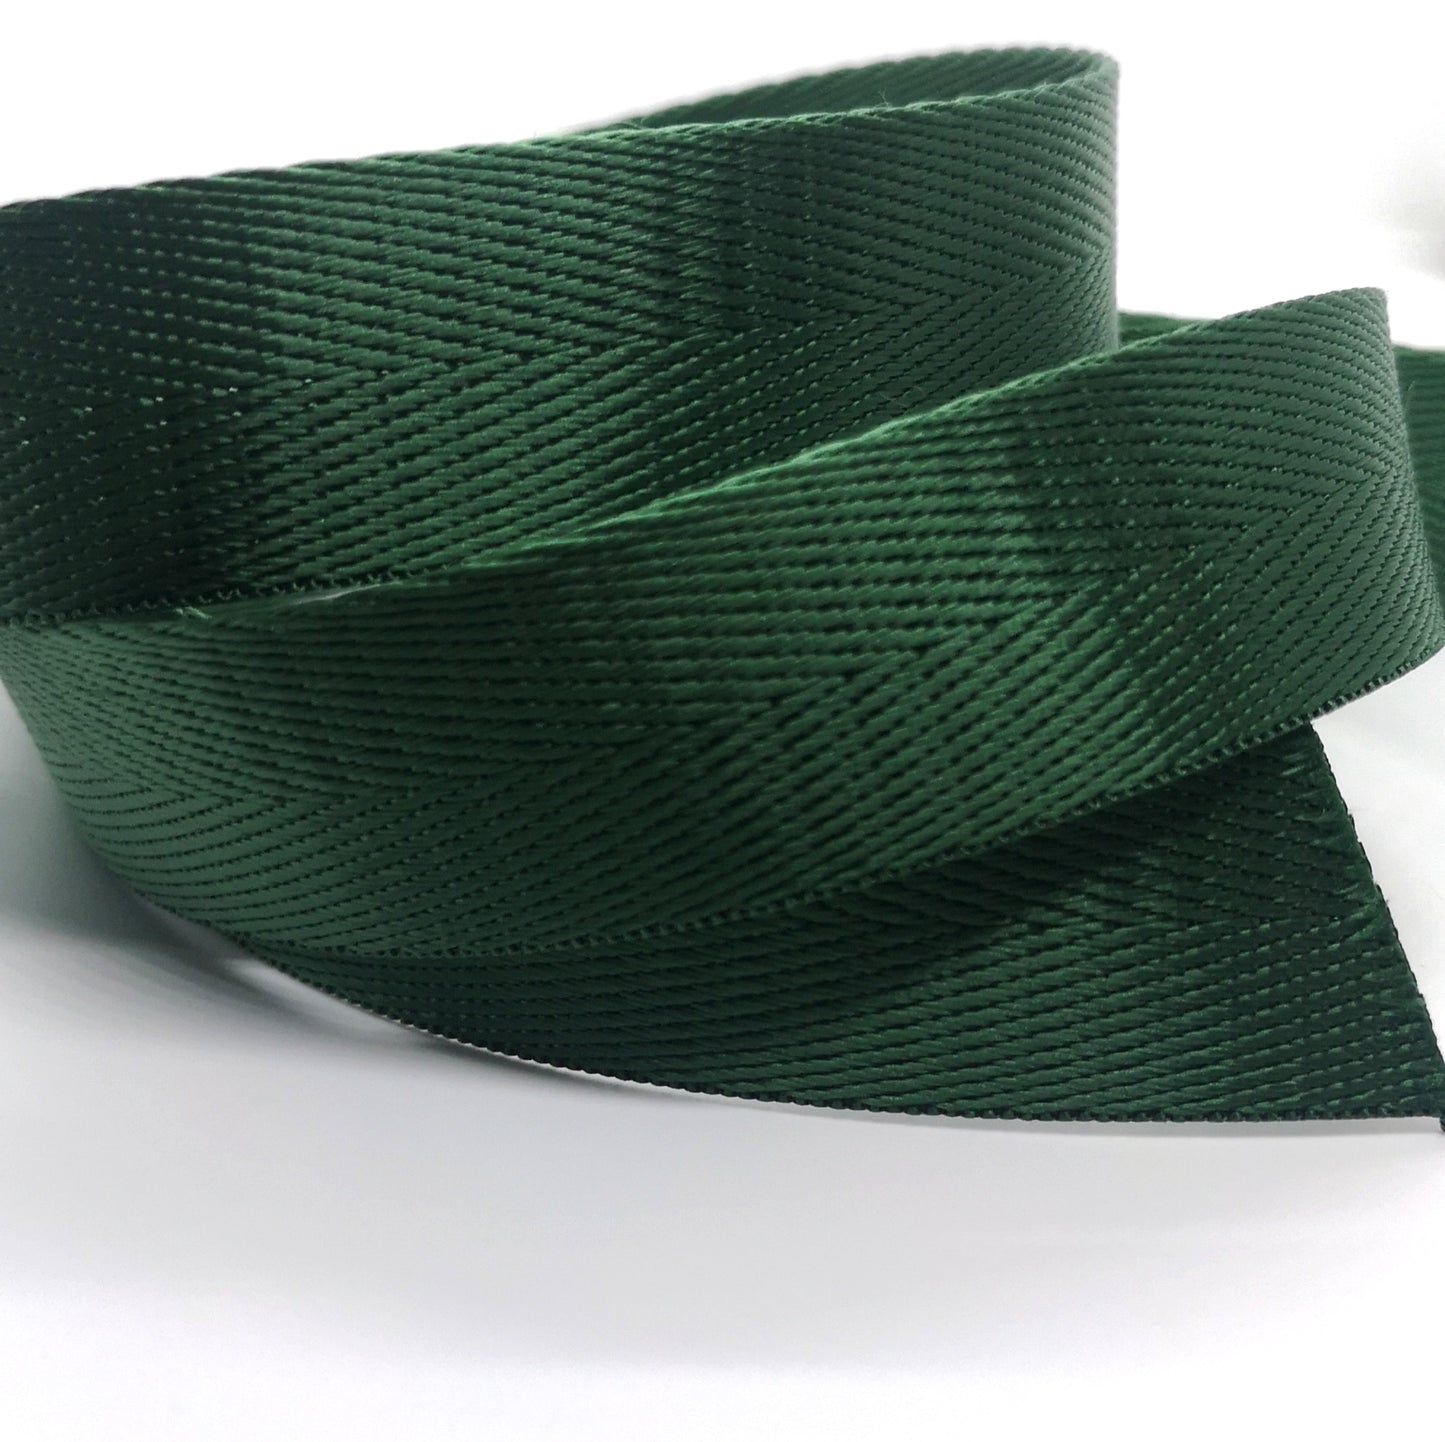 1" Wide Webbing - Solid Color - PALM GREEN